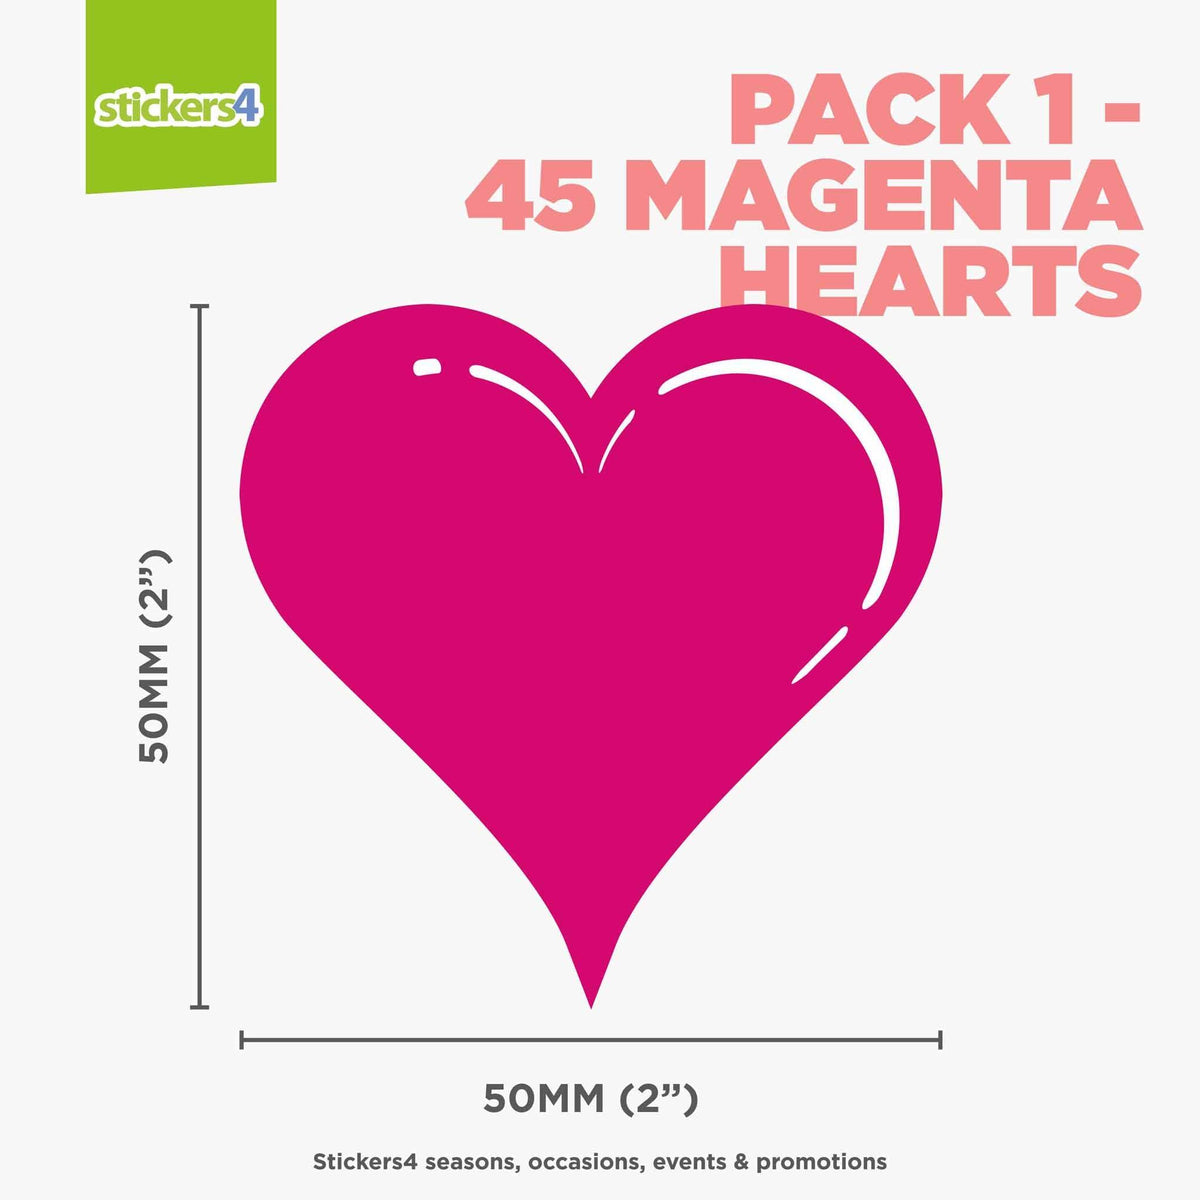 Static Cling Hearts: Pack 1 (45 Hearts @ 50mm)